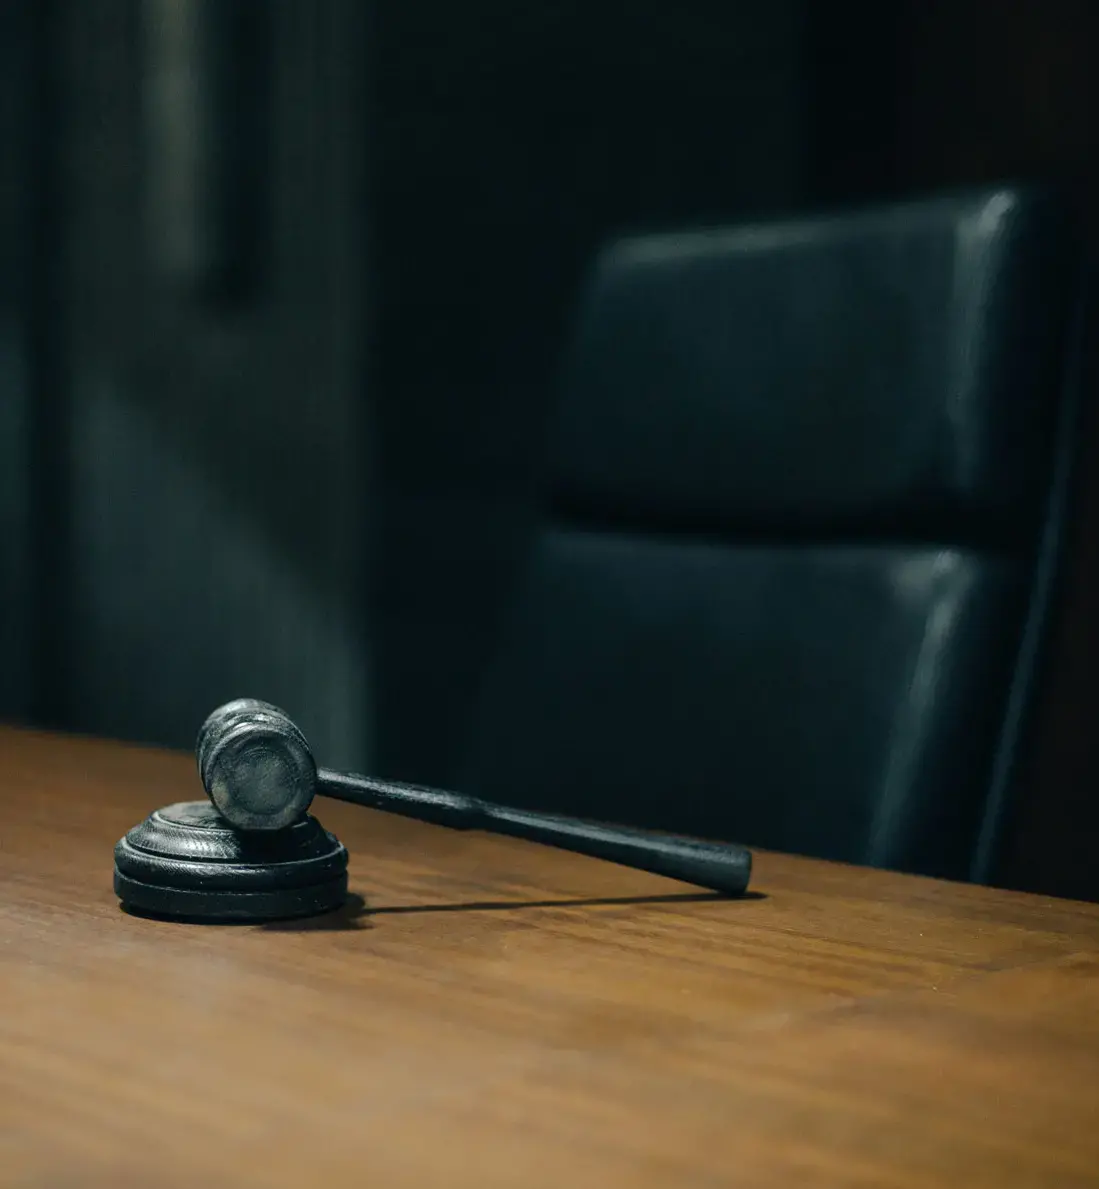 A Resting Gavel on a Table with Black Chair